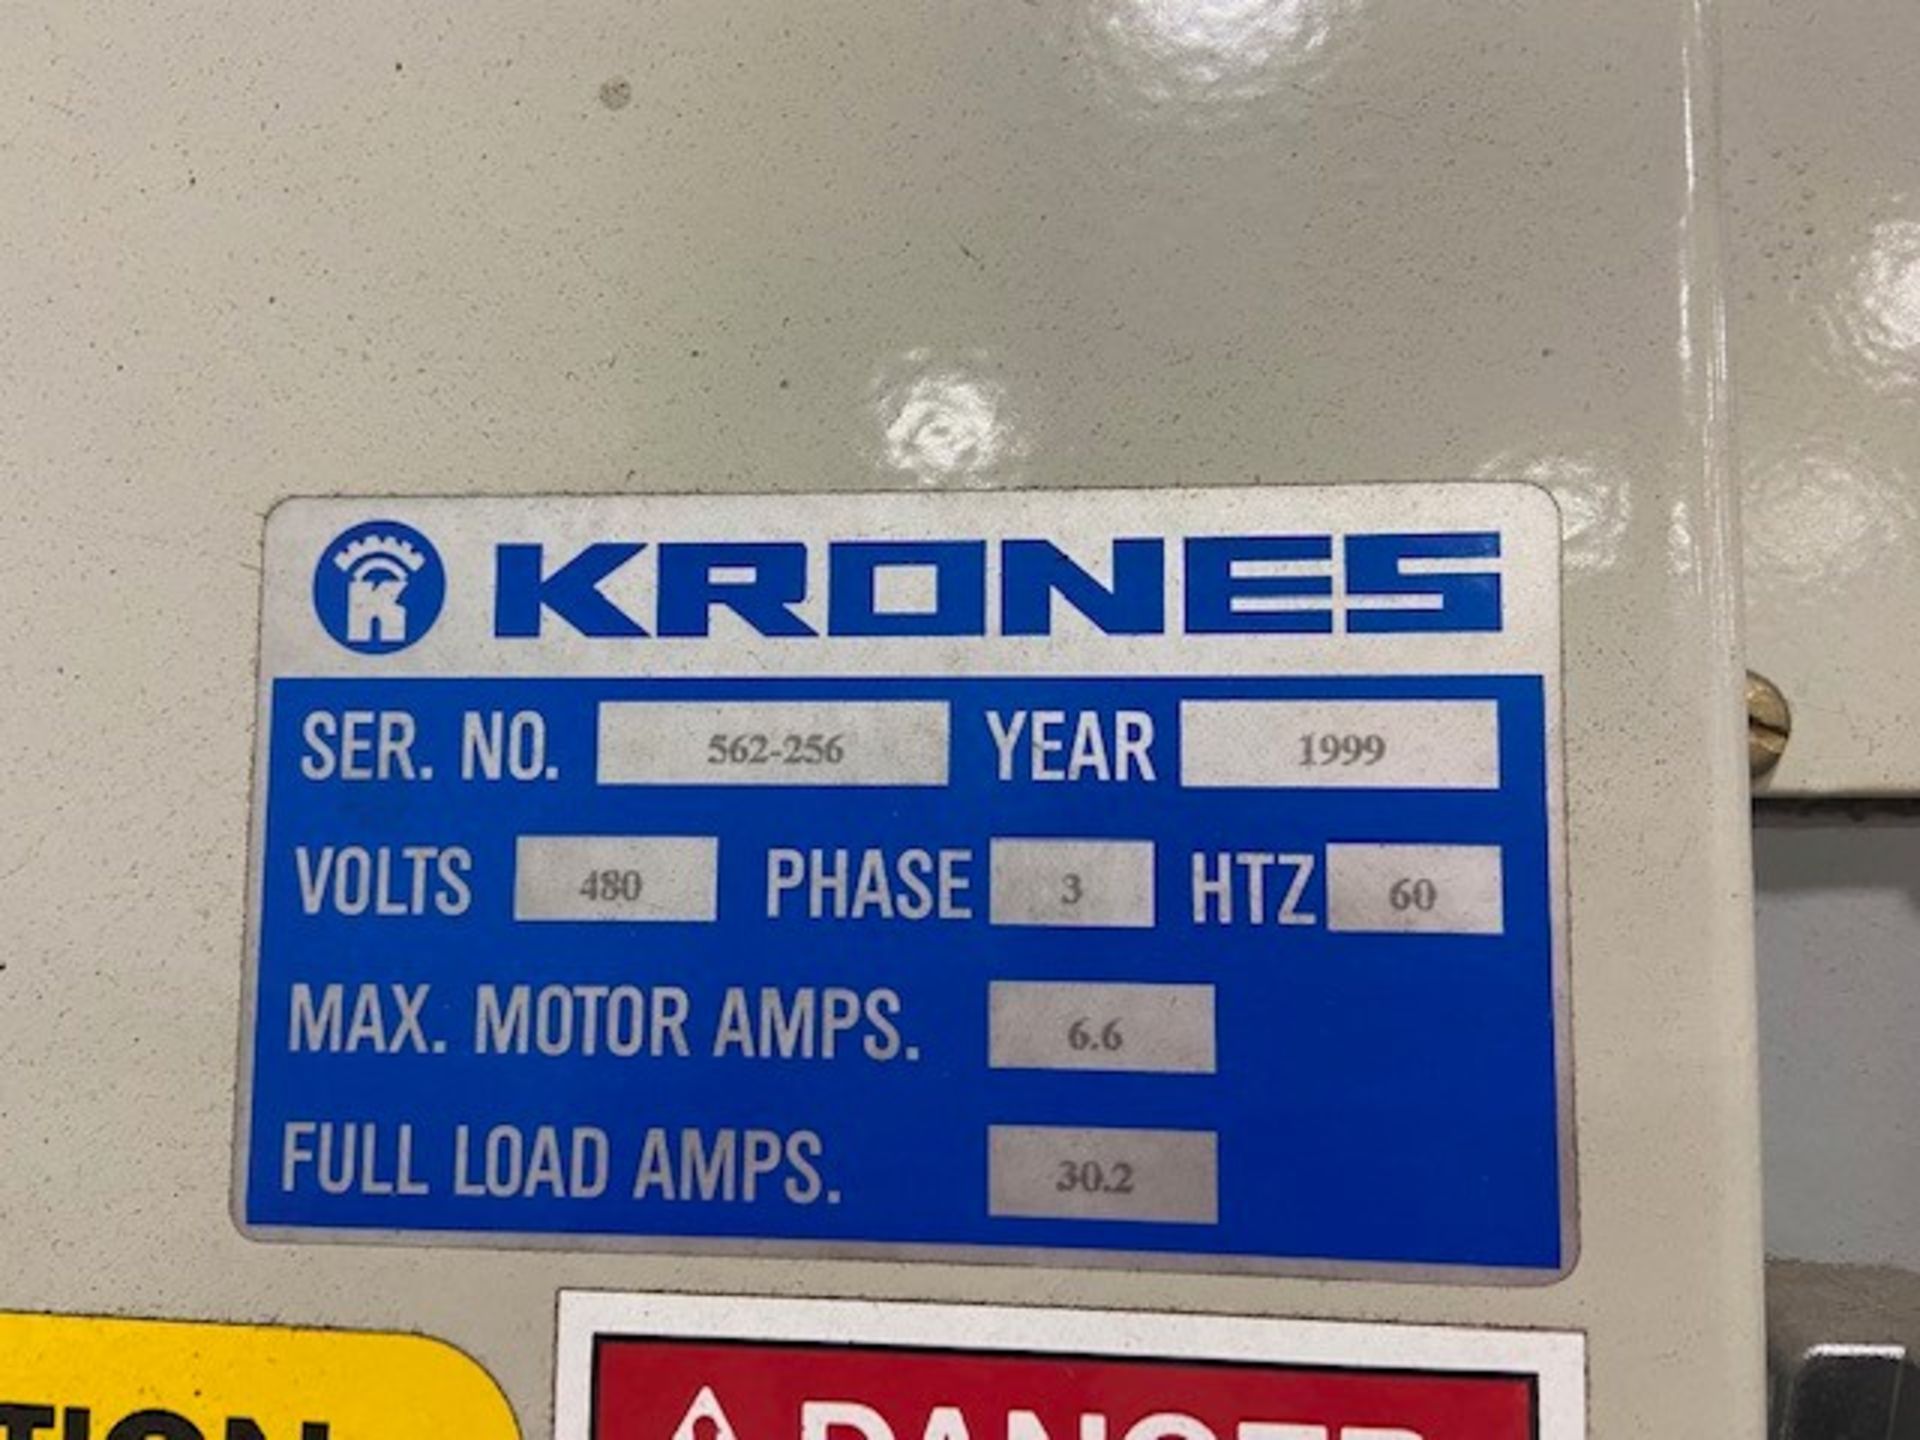 Krones VarioJet Rinser, S/N 562-256, 480 Volts, 3 Phase, with Double Door Control Cabinet, with - Image 21 of 21